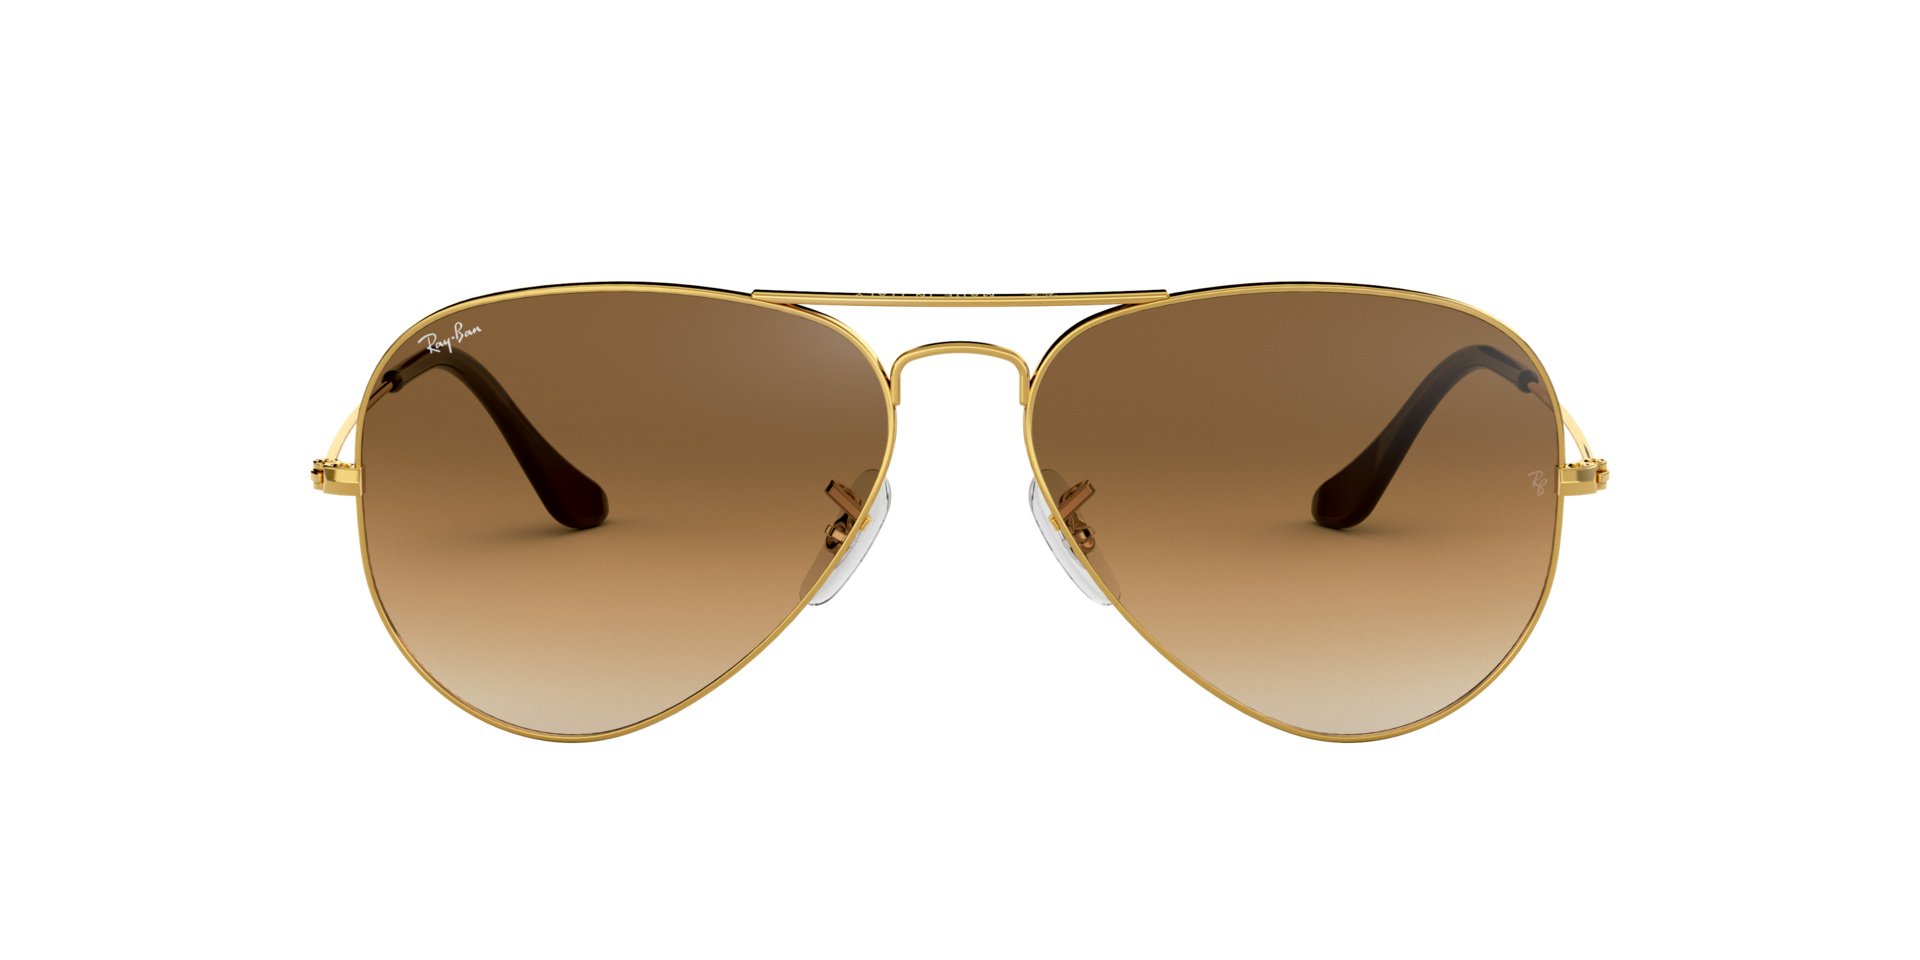 Ray Ban Aviator Large Metal Sonnenbrille RB3025 001/51 55